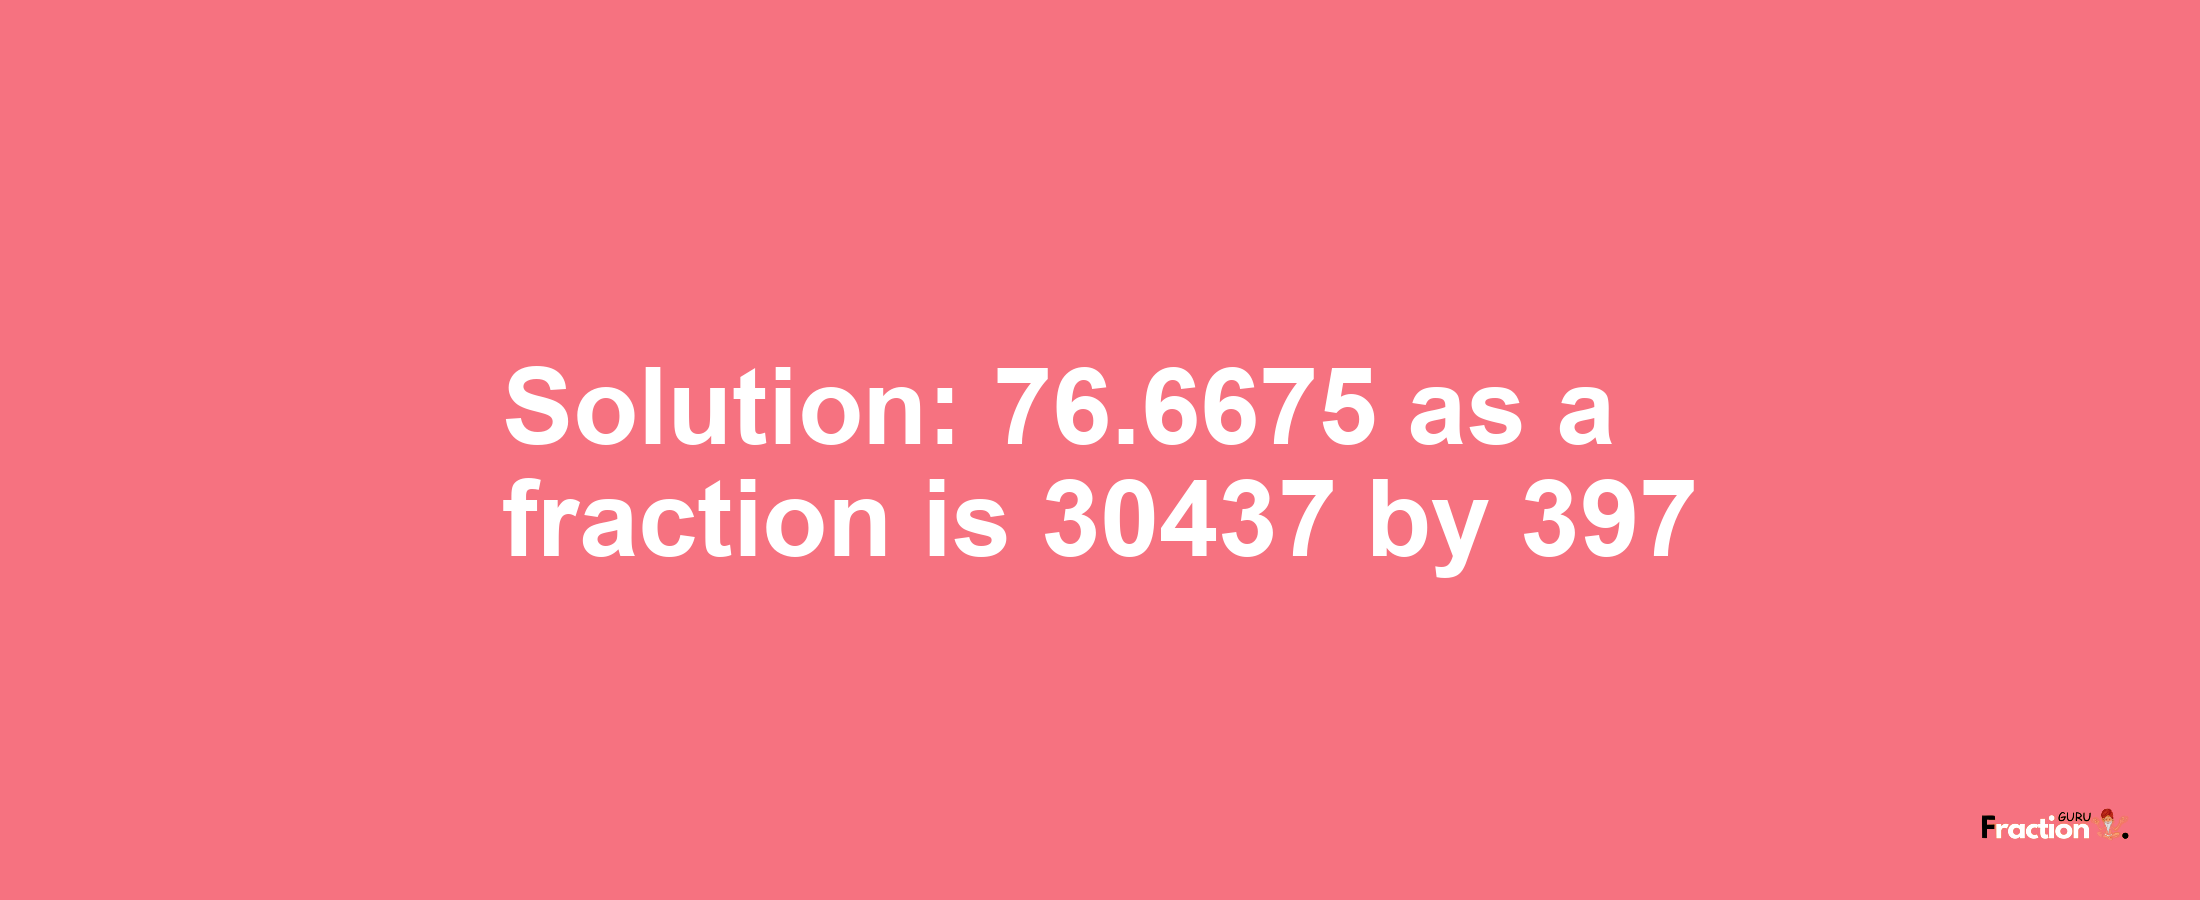 Solution:76.6675 as a fraction is 30437/397